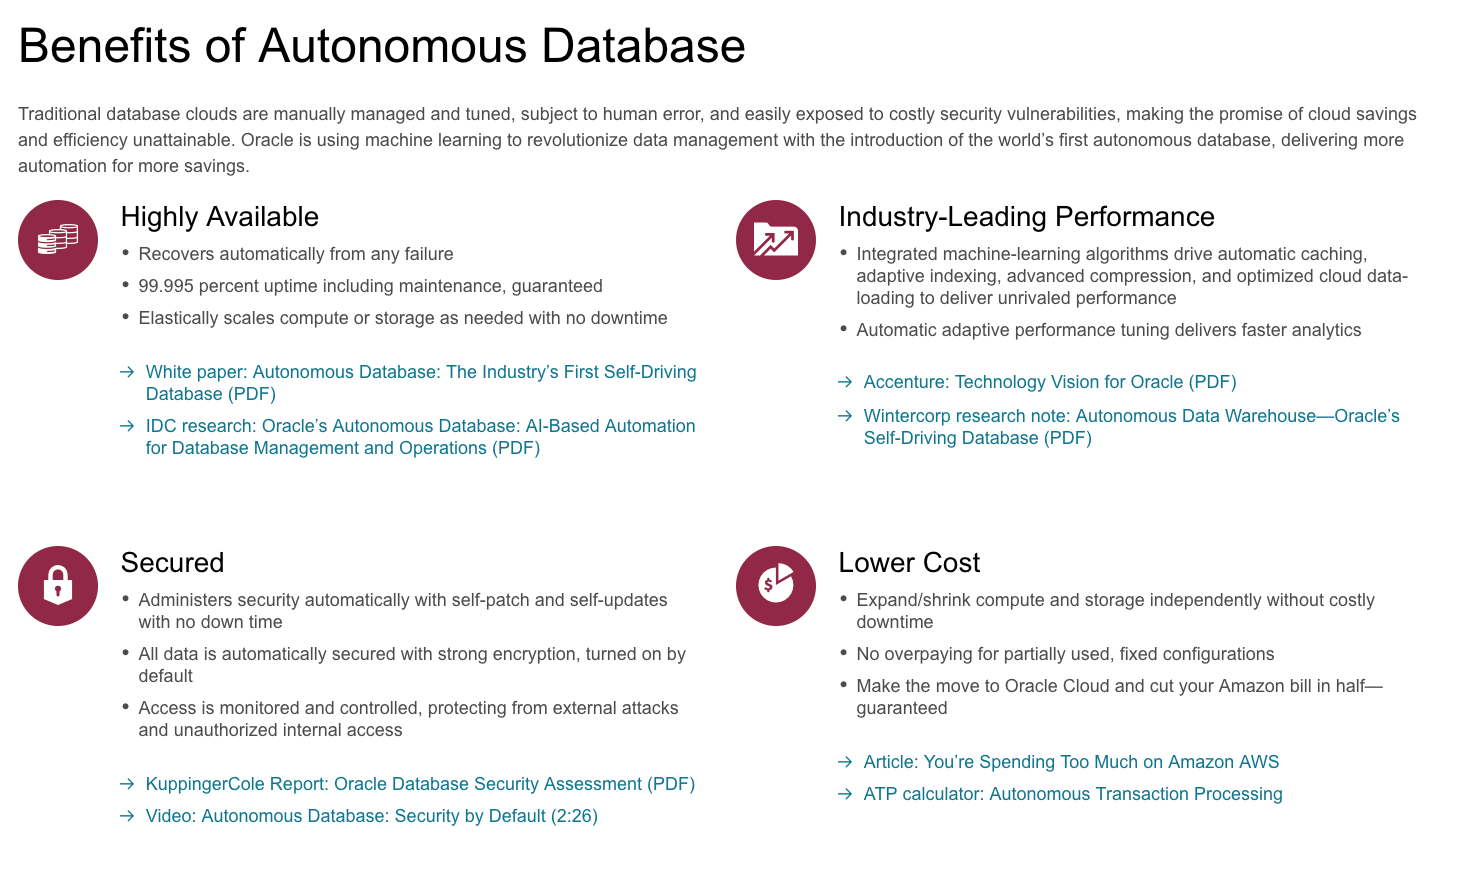 Oracle is using machine learning to revolutionize data management with the introduction of the world’s first autonomous database, delivering more automation for more savings.